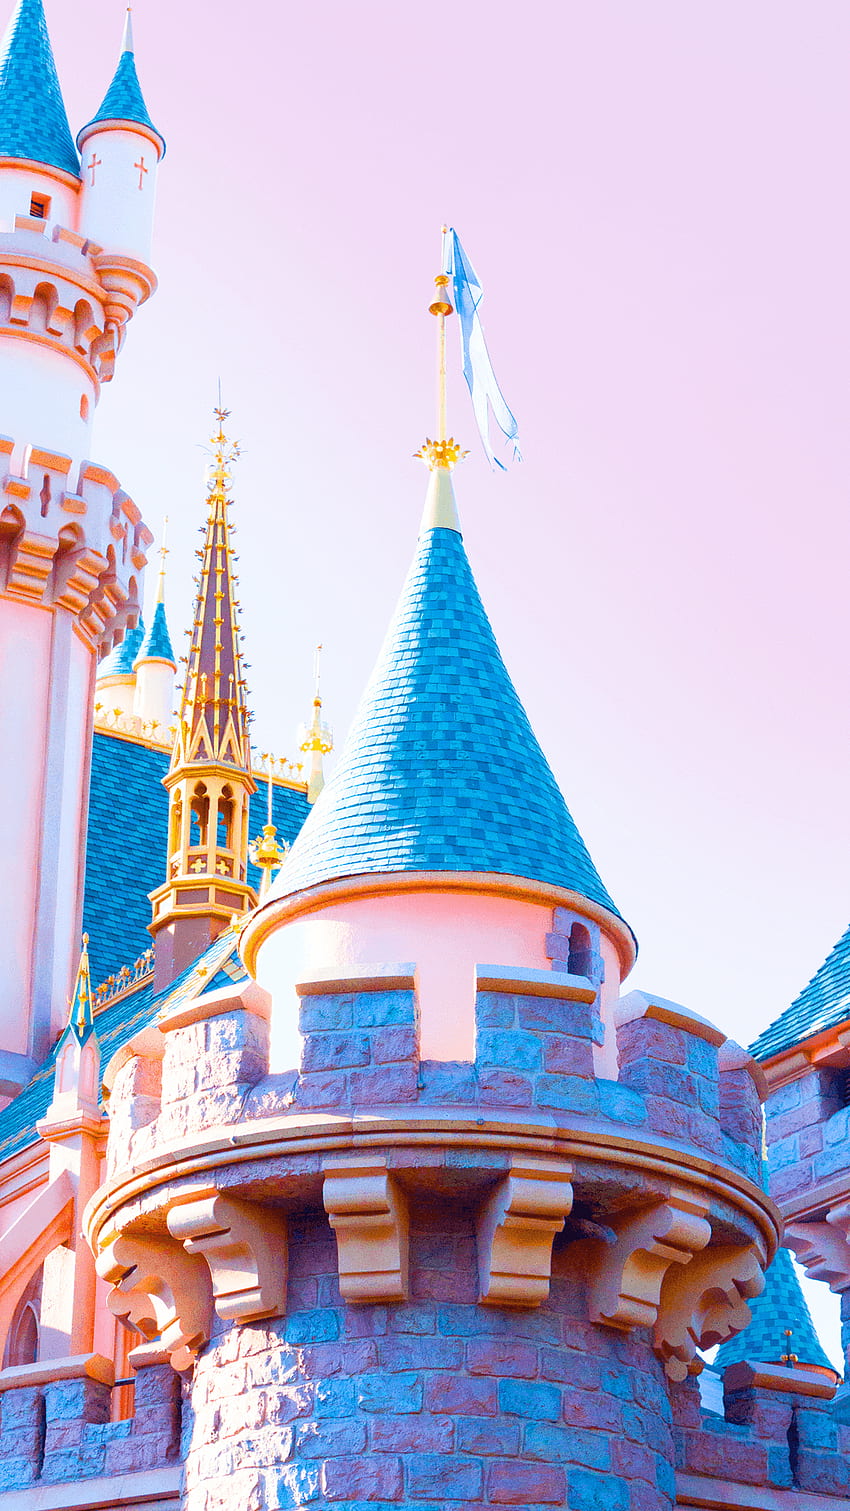 Sleeping Beauty Castle at Disneyland captured in the morning with a pink sky background - Disneyland